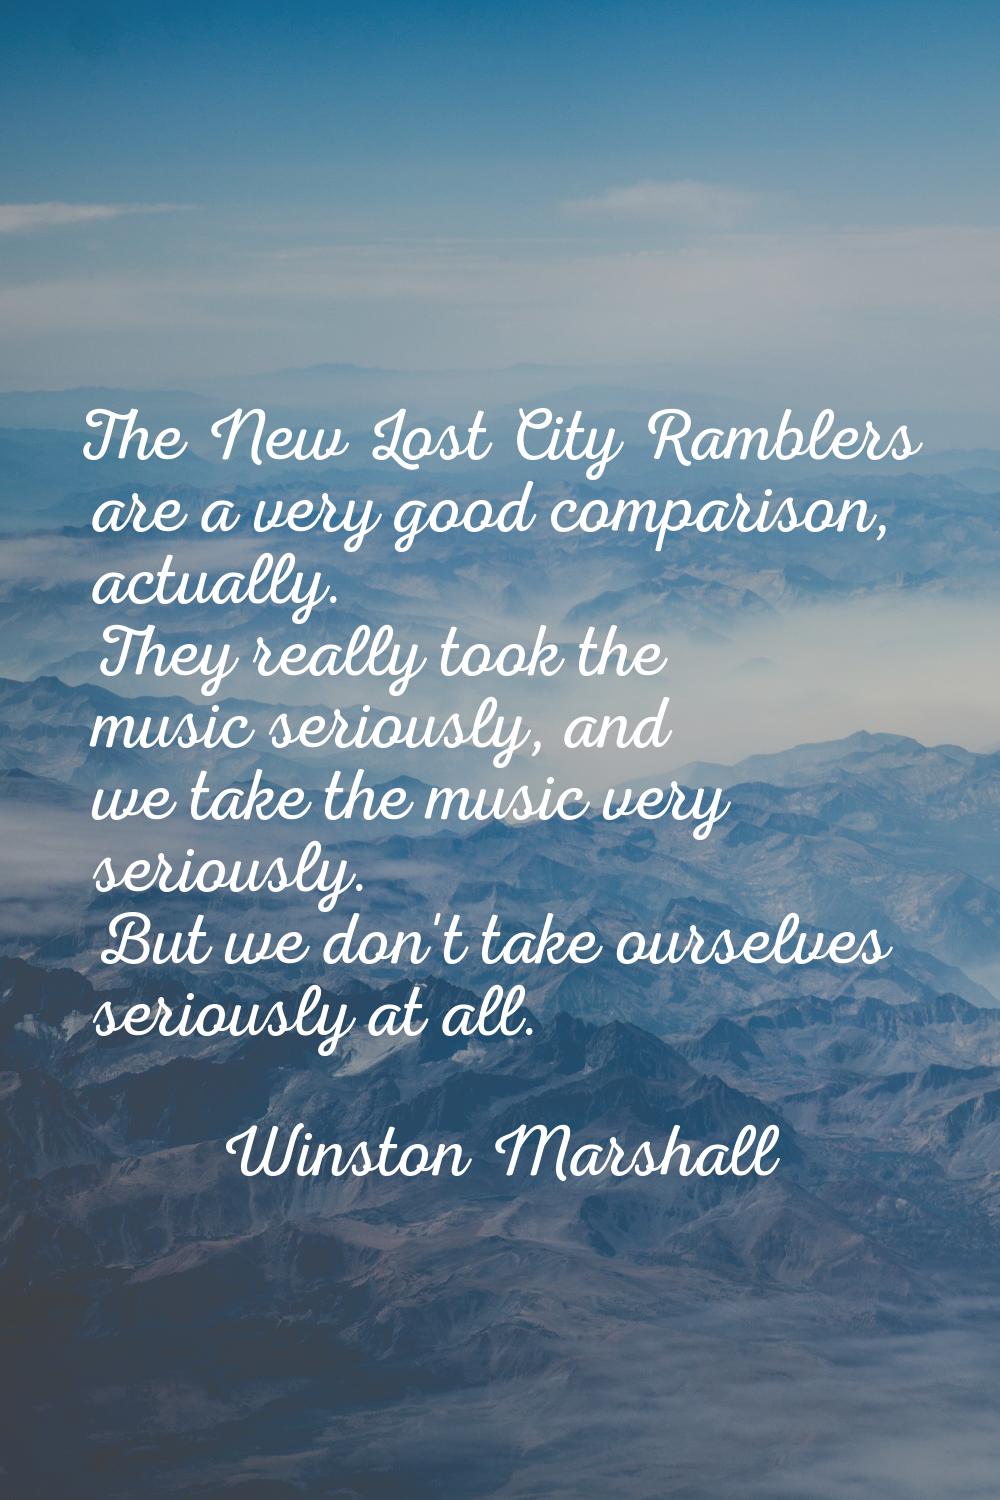 The New Lost City Ramblers are a very good comparison, actually. They really took the music serious